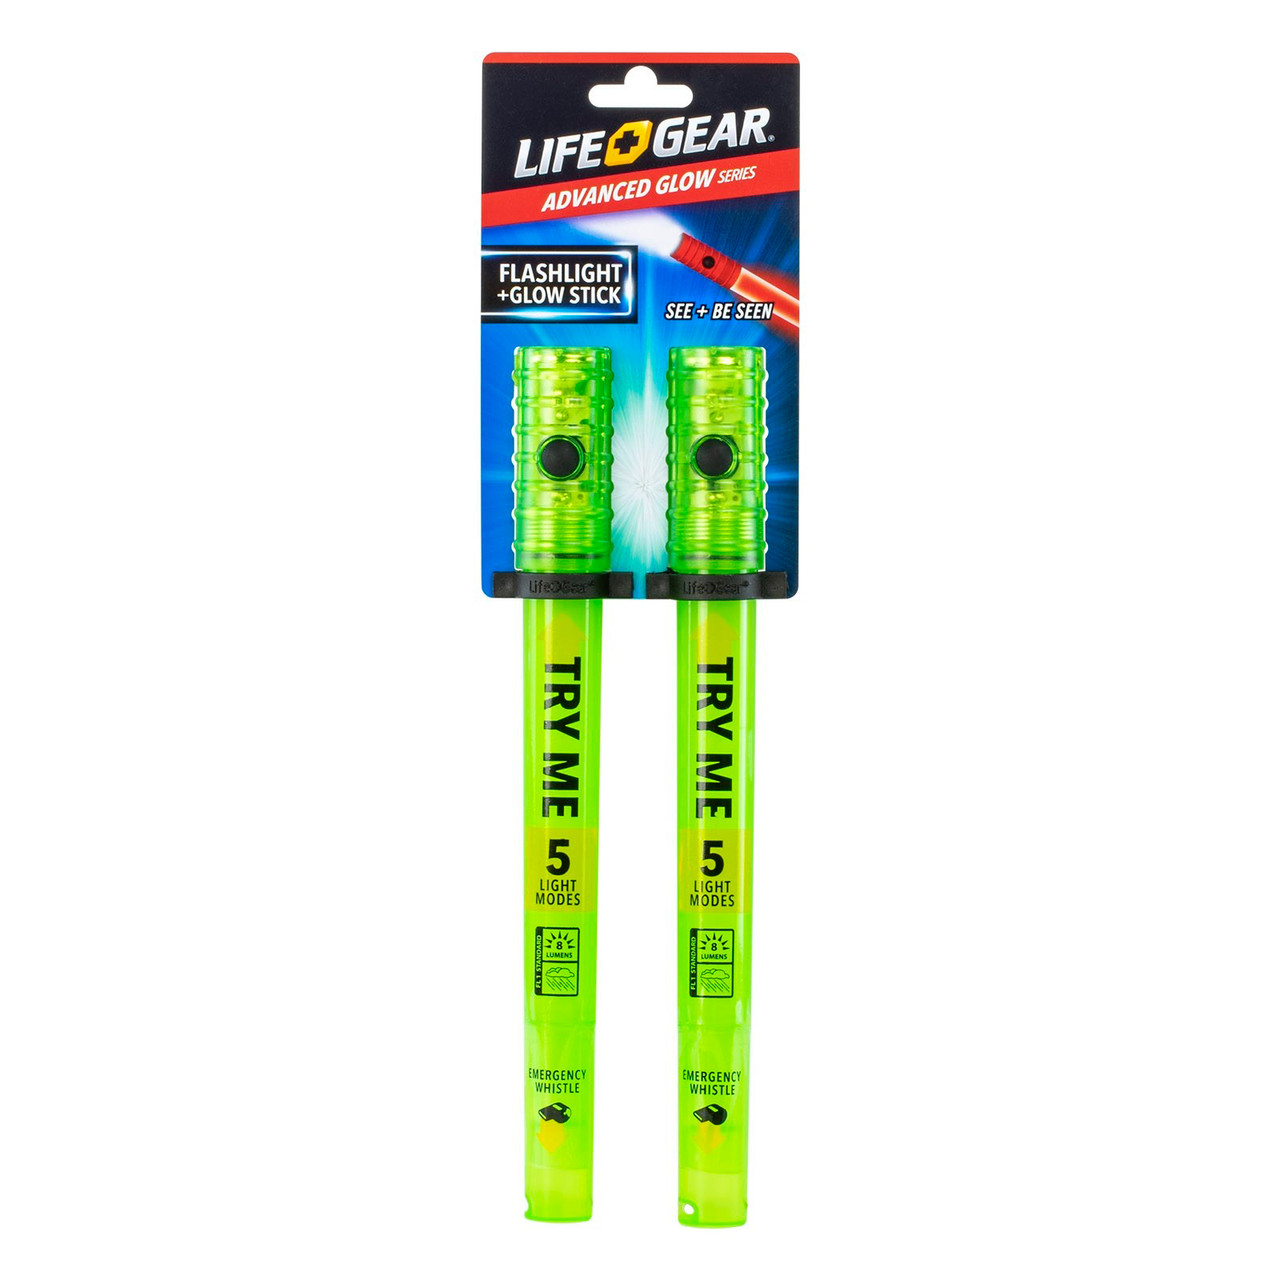 Life + Gear Usb Rechargeable Glow Stick Flashlight With Safety Flash And  Whistle - Green : Target